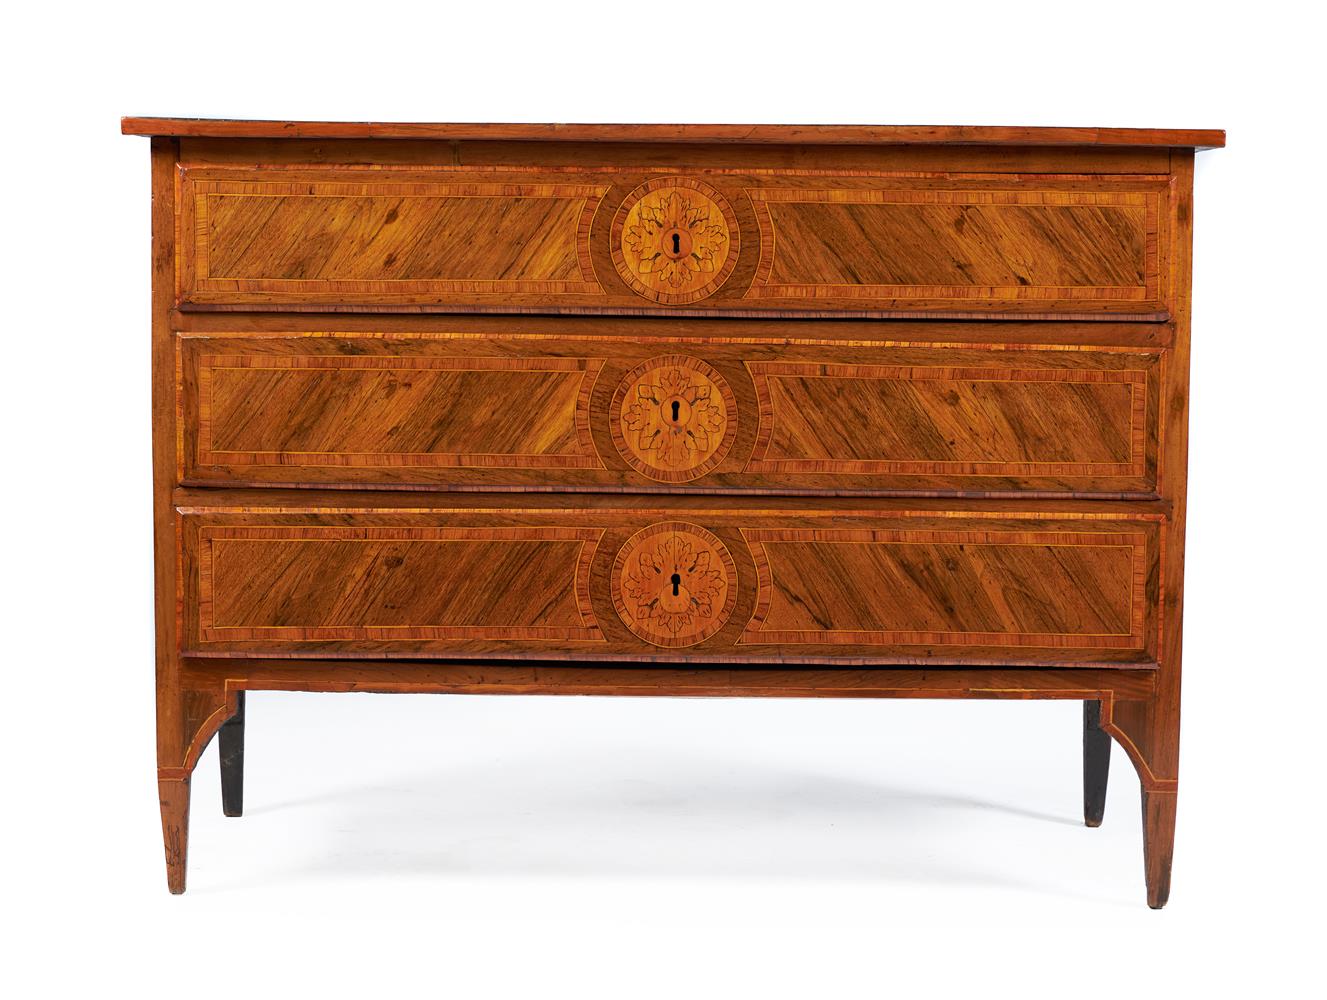 Y AN ITALIAN WALNUT AND TULIPWOOD BANDED COMMODE, LATE 18TH CENTURY - Image 2 of 5